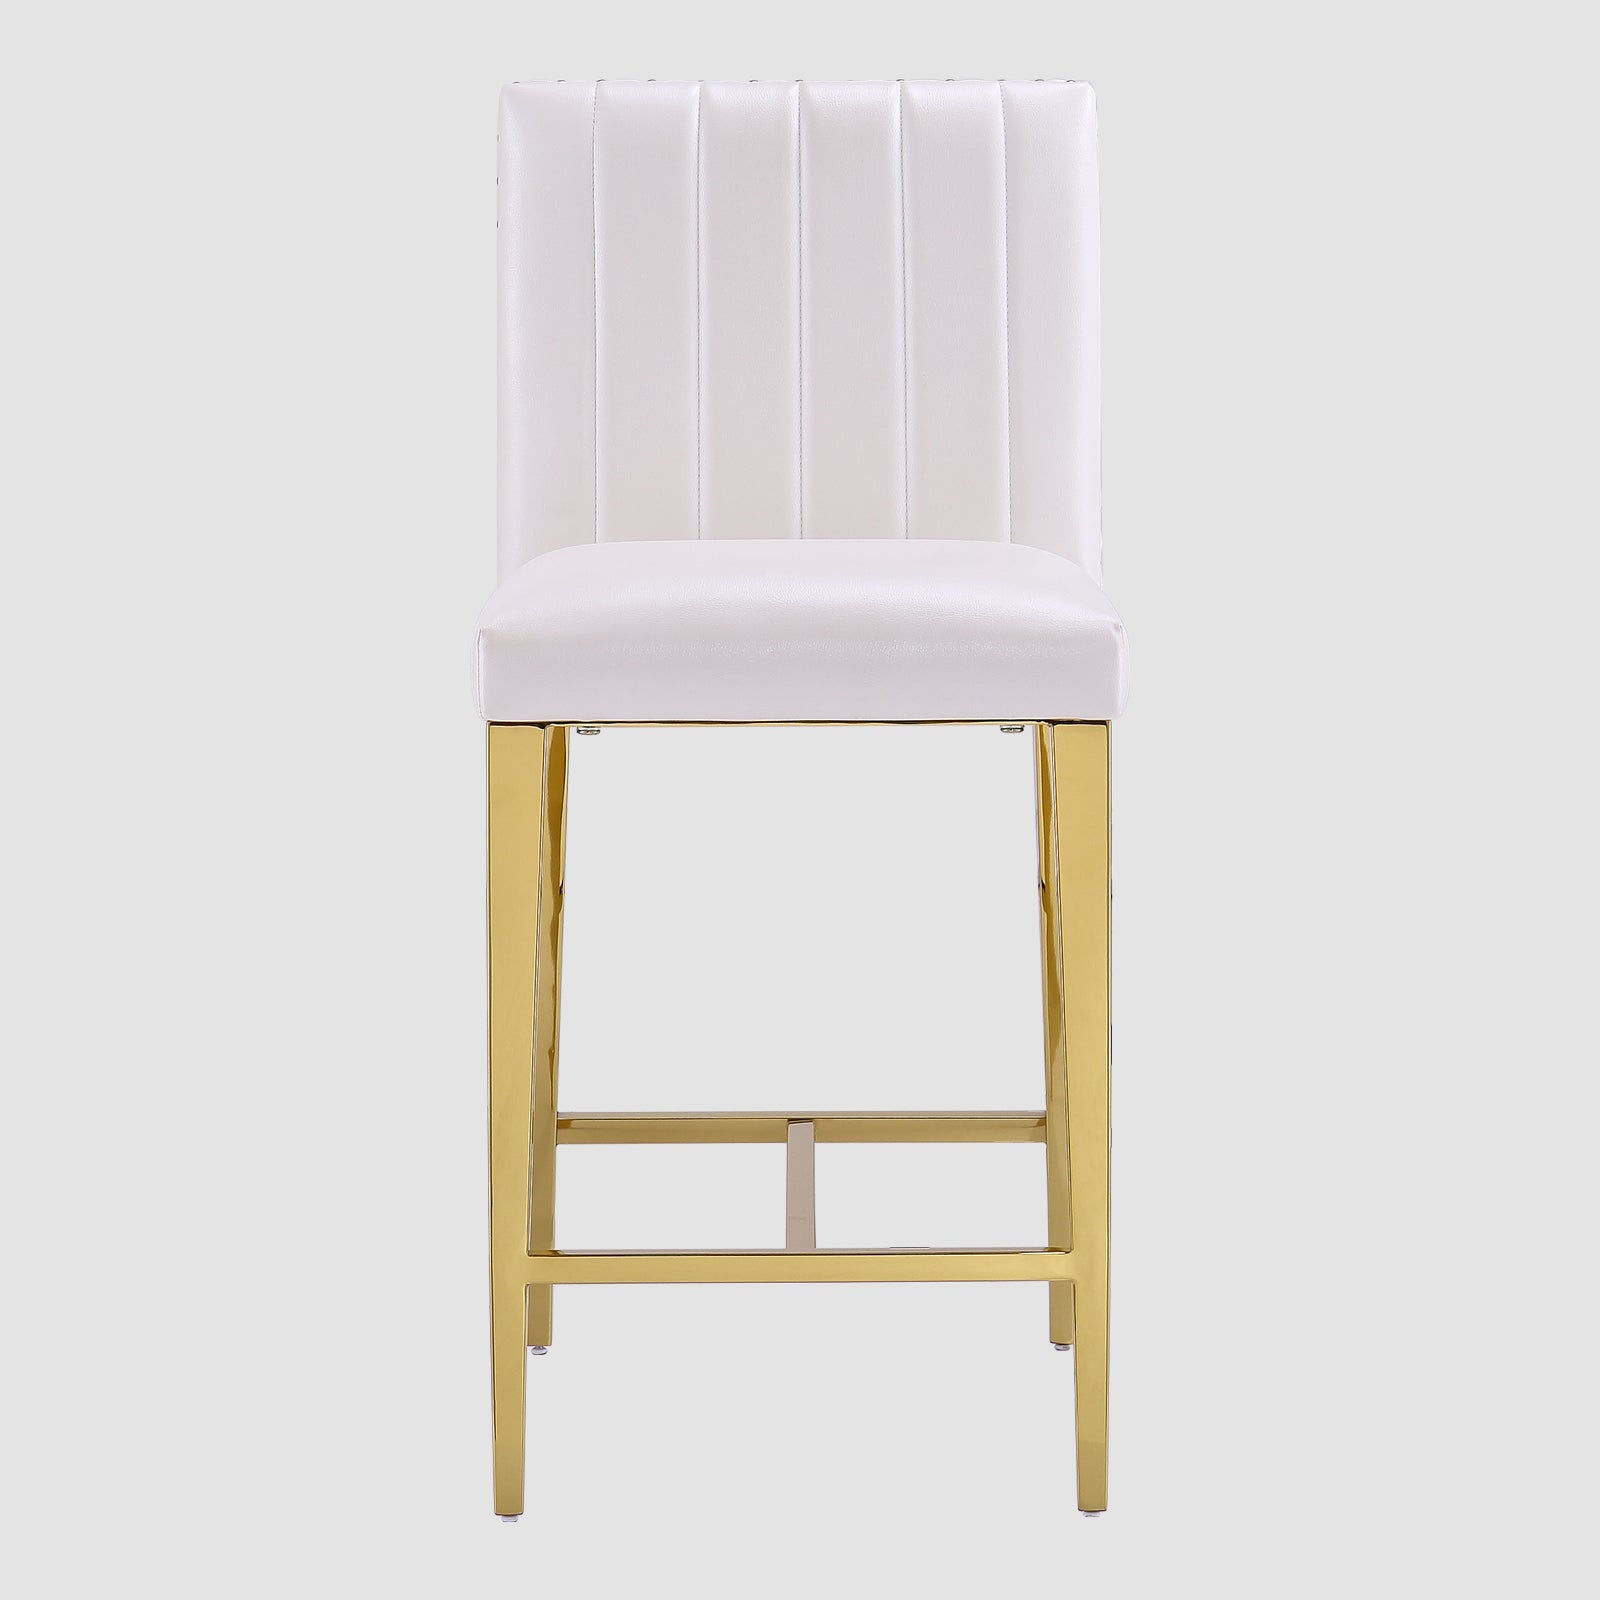 Counter Height Bar Stools | White Faux Leather | 24.8-Inch Height